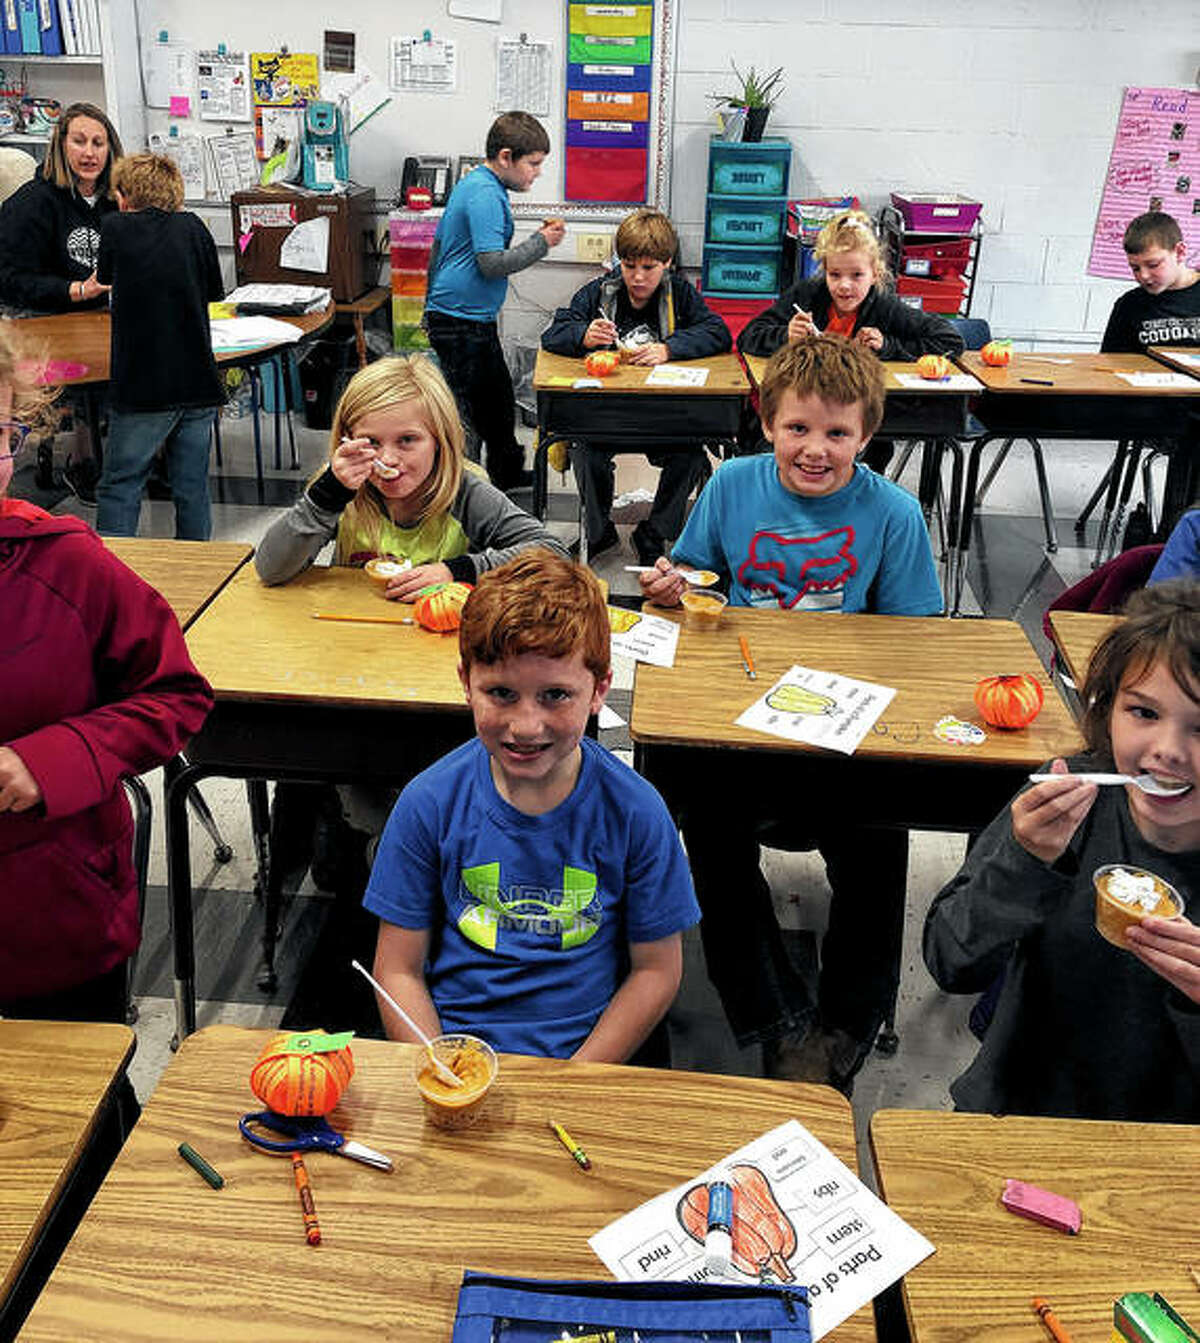 Winchester Elementary School third-graders in Mrs. Leonard’s class — Carter Stice (from left), Daxton Littig and Ainsley Freeman — work on a pumpkin cut-and-paste worksheet. Pike-Scott Farm Bureau Agriculture Literacy coordinator Rachel Smith recently visited third-graders at the school to teach a lesson on pumpkins. Students made 3-D pumpkin life cycle decorations, completed cut-and-paste coloring sheets, watched a video on pumpkins, and made a pumpkin-themed snack. Third-grade teachers Mrs. Leonard and Mrs. Sichting also received lesson materials involving pumpkins that covered vocabulary, mathematics, grammar and language arts.